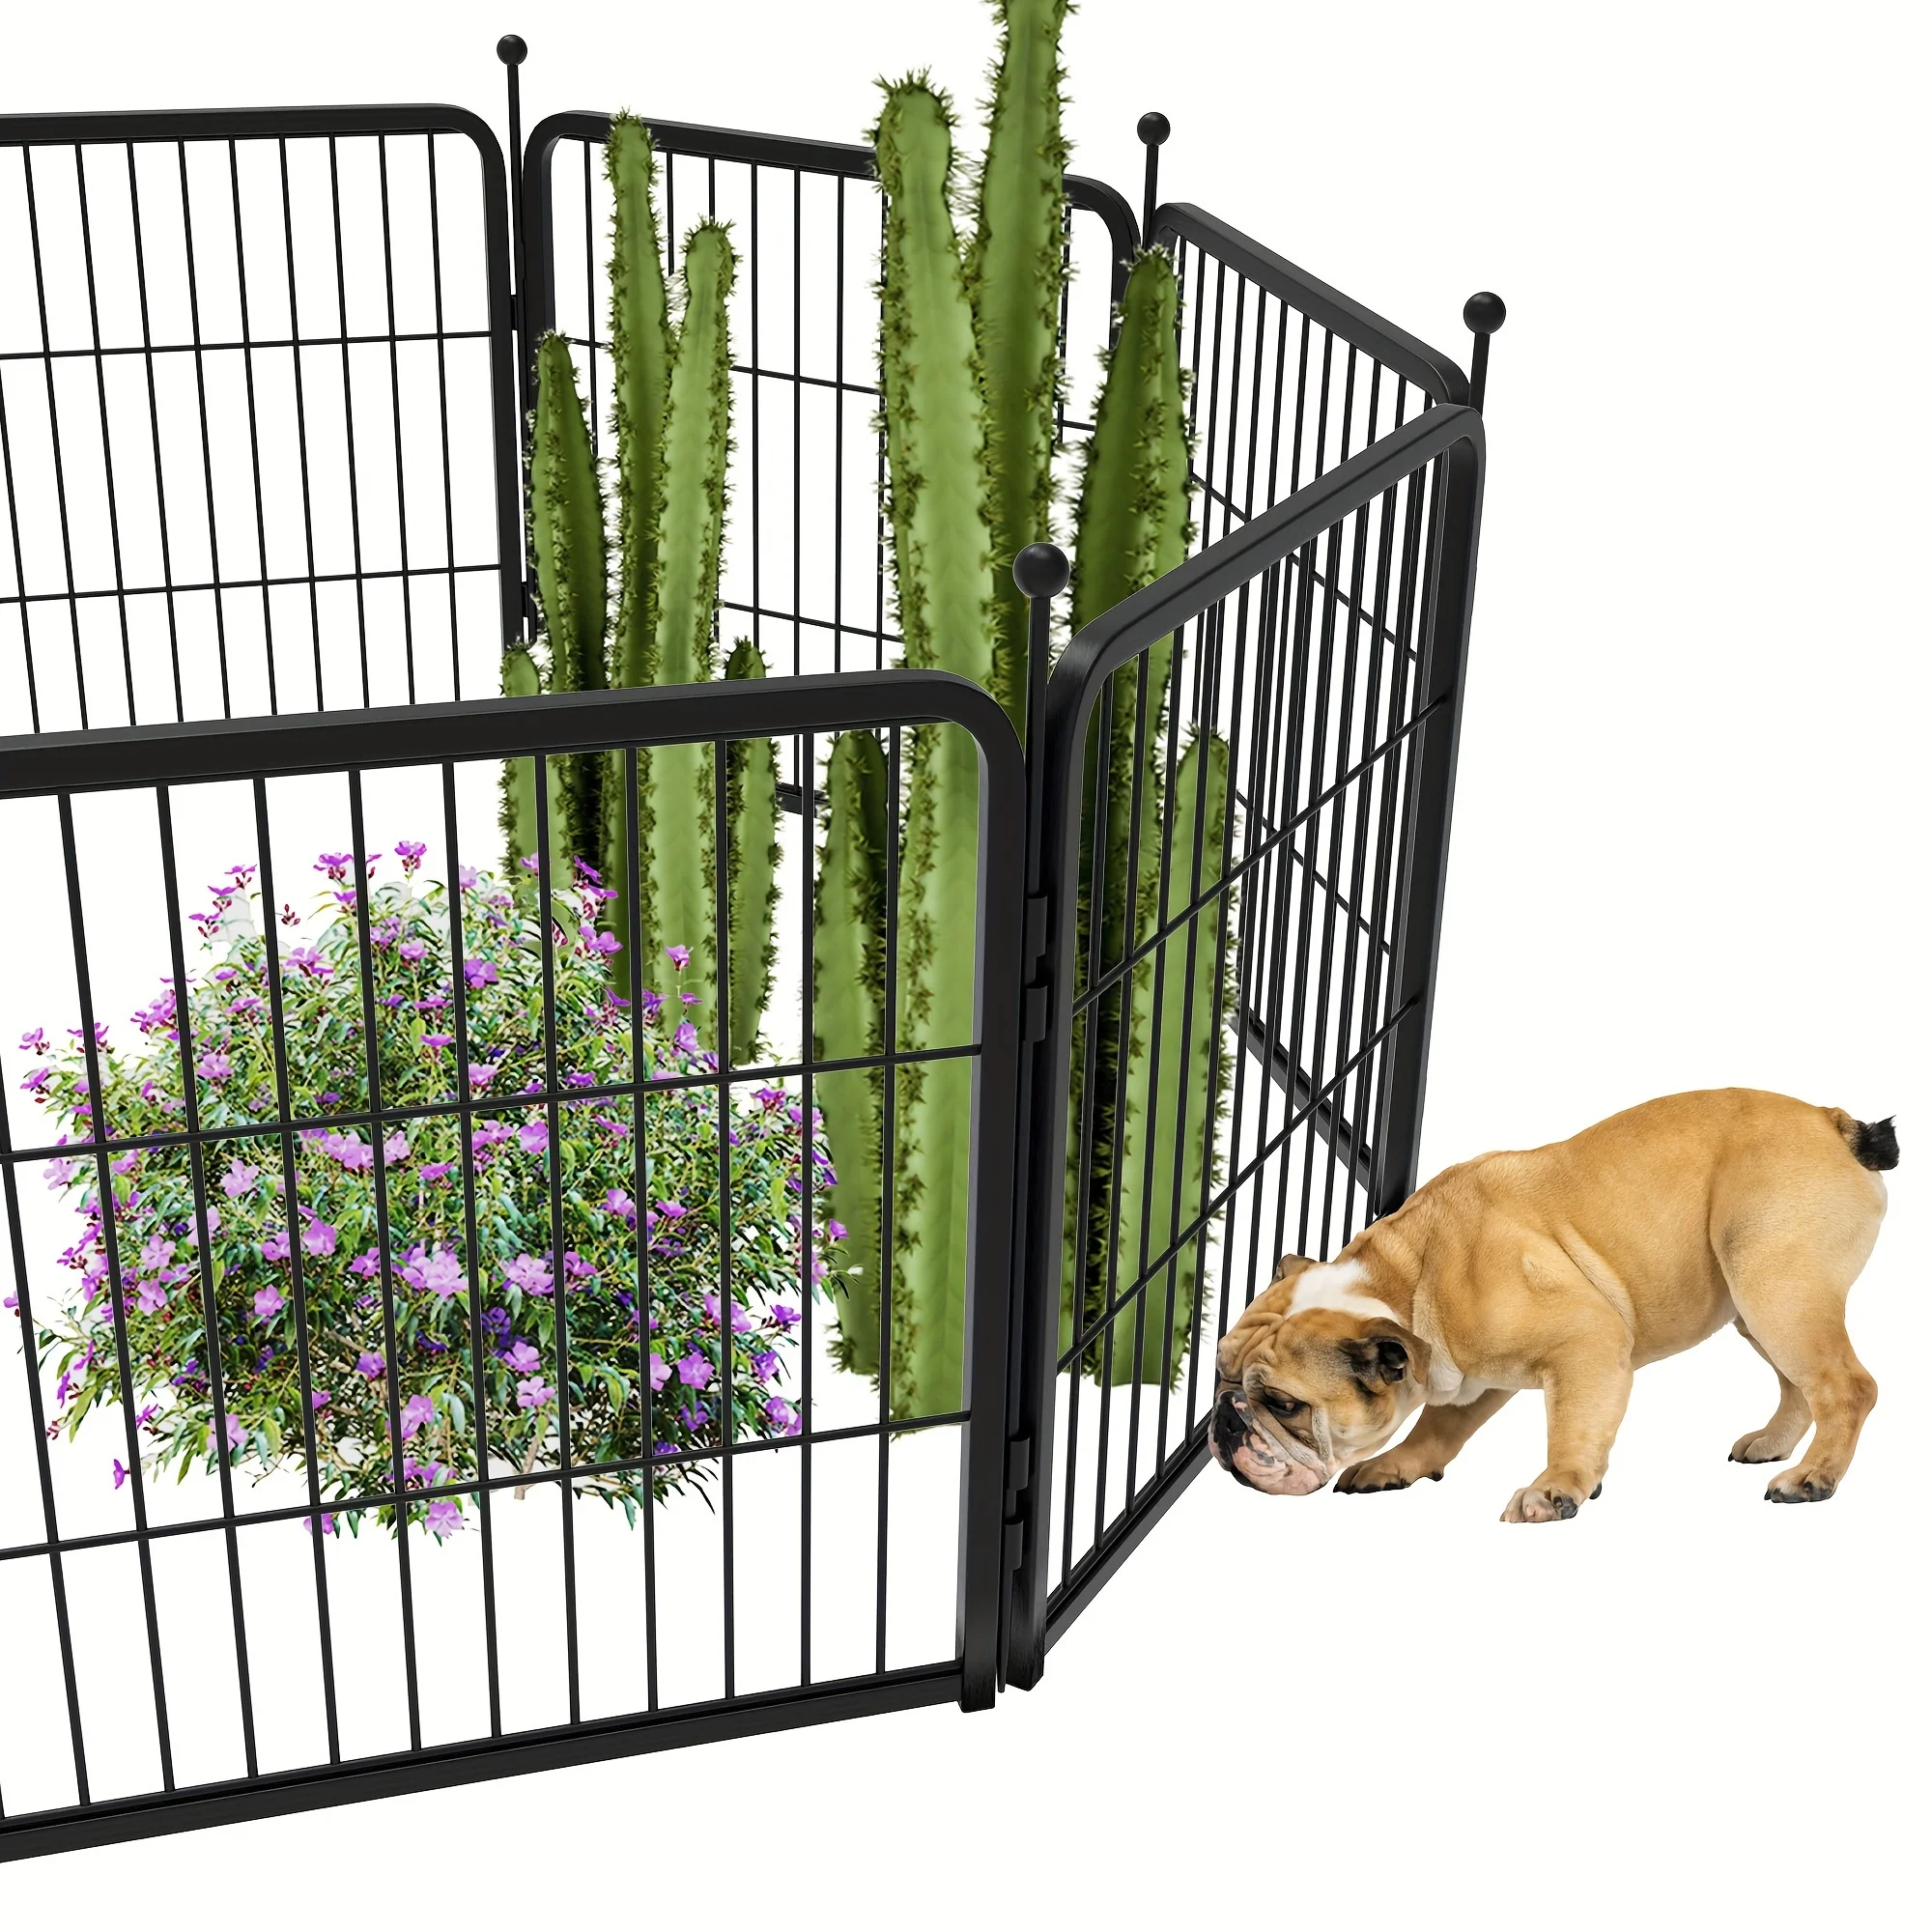 

6pcs Panels Decorative Garden Fence Panels With Gate, Dog Fence For The Yard, Heavy Duty Metal, 24inch High 11.12ft Long In Tot